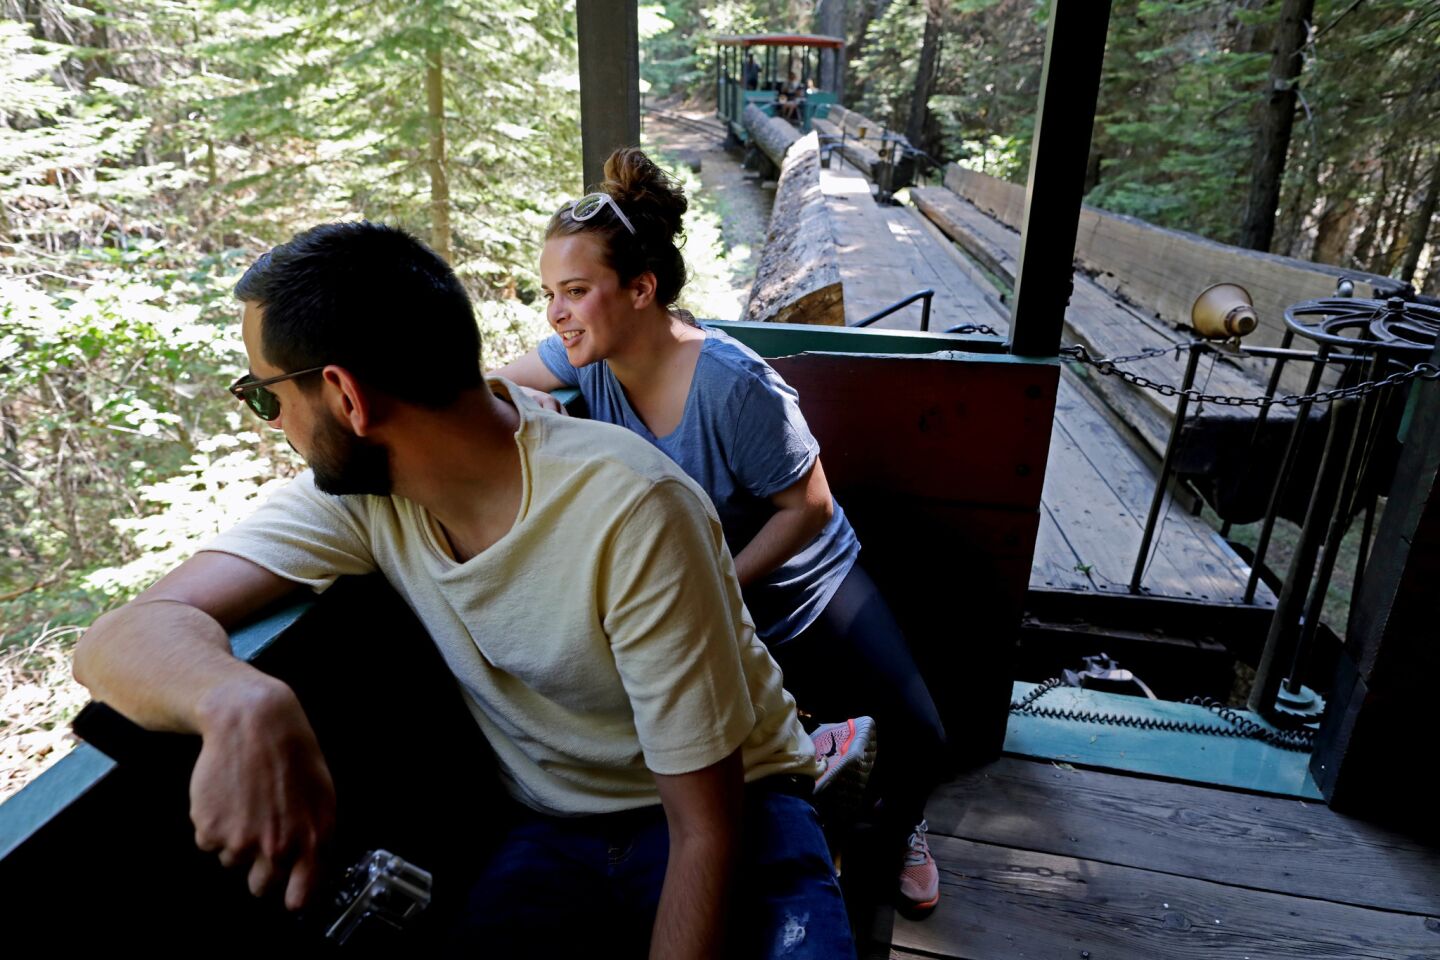 Benjamin Chevelle, 32, and girlfriend Celia Leonardo, 27, of Paris ride the Yosemite Mountain Sugar Pine Railroad in Fish Camp on Aug. 2. Chevelle and Leonardo planned their trip six months ago to visit Yosemite National Park. "We are a little bit disappointed because Yosemite is very different than other national parks," said Leonardo. There were only 10 guests on the train. Normally in July and August there would be 100-150 riders.